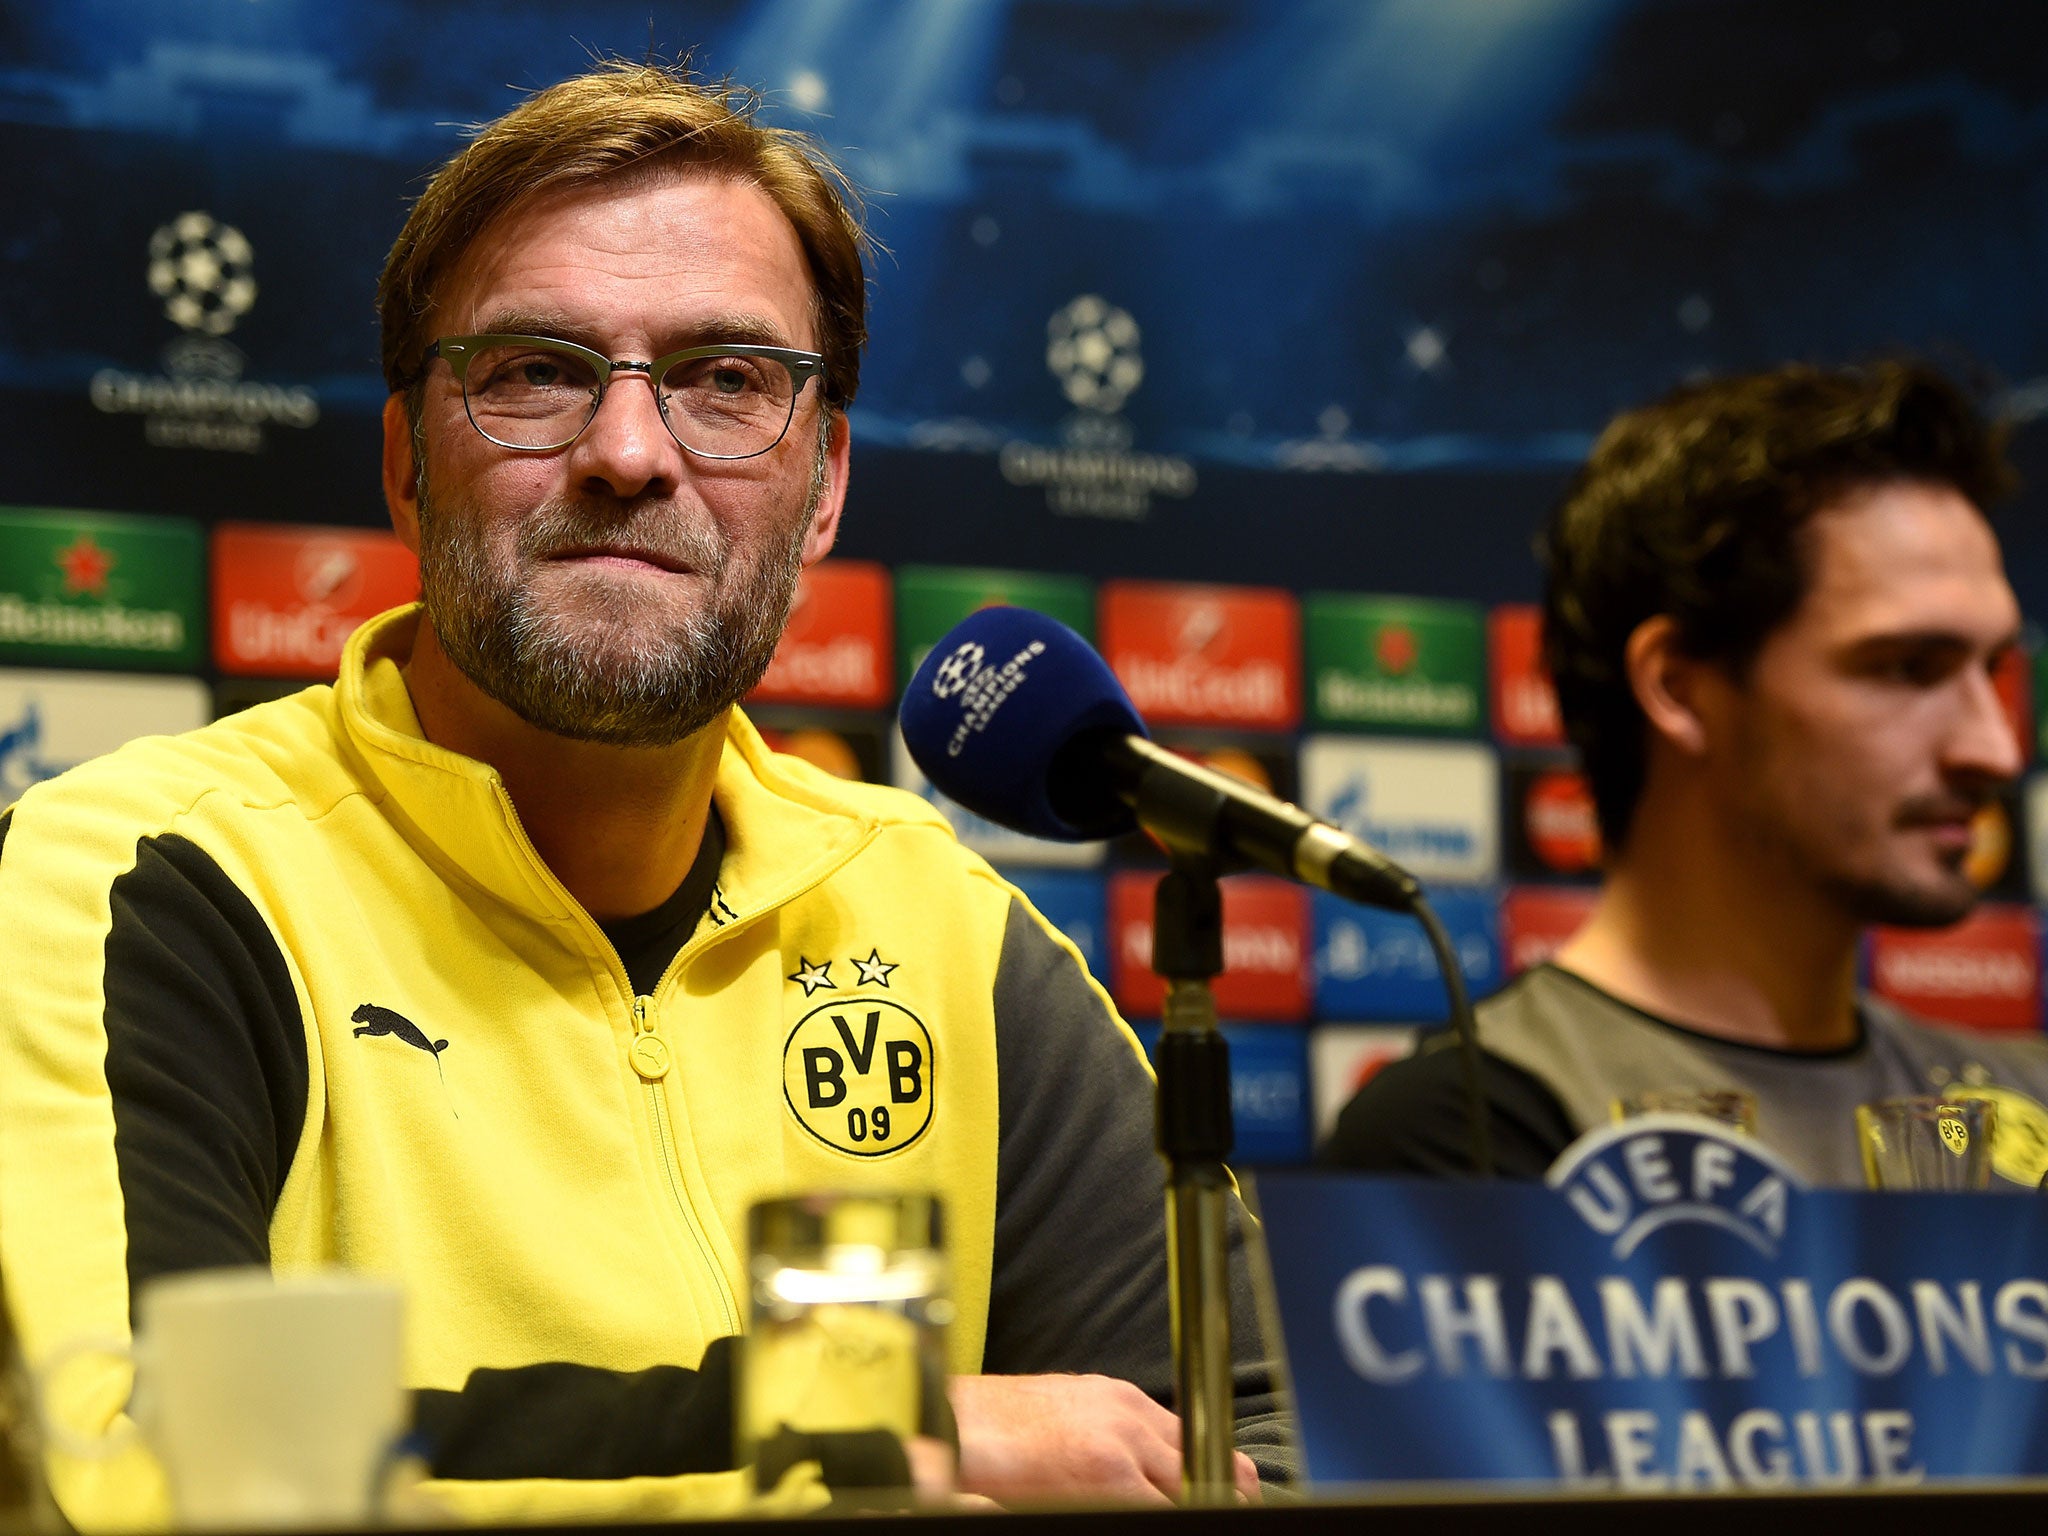 Mats Hummels (right) has back Jurgen Klopp (left) to win the title with Liverpool